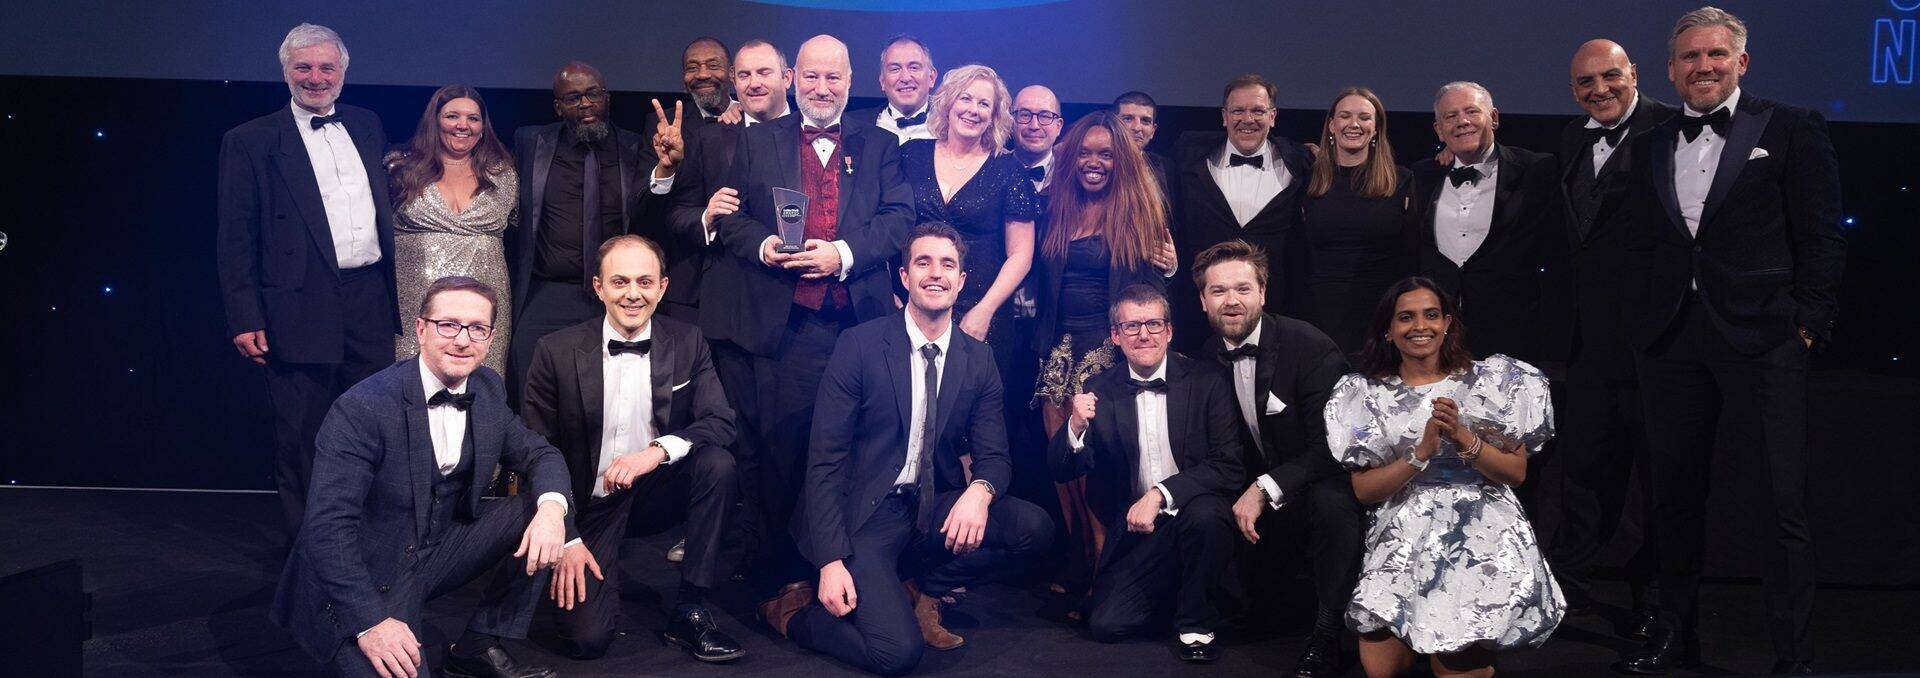 Utility Week Awards 2016: last chance to enter